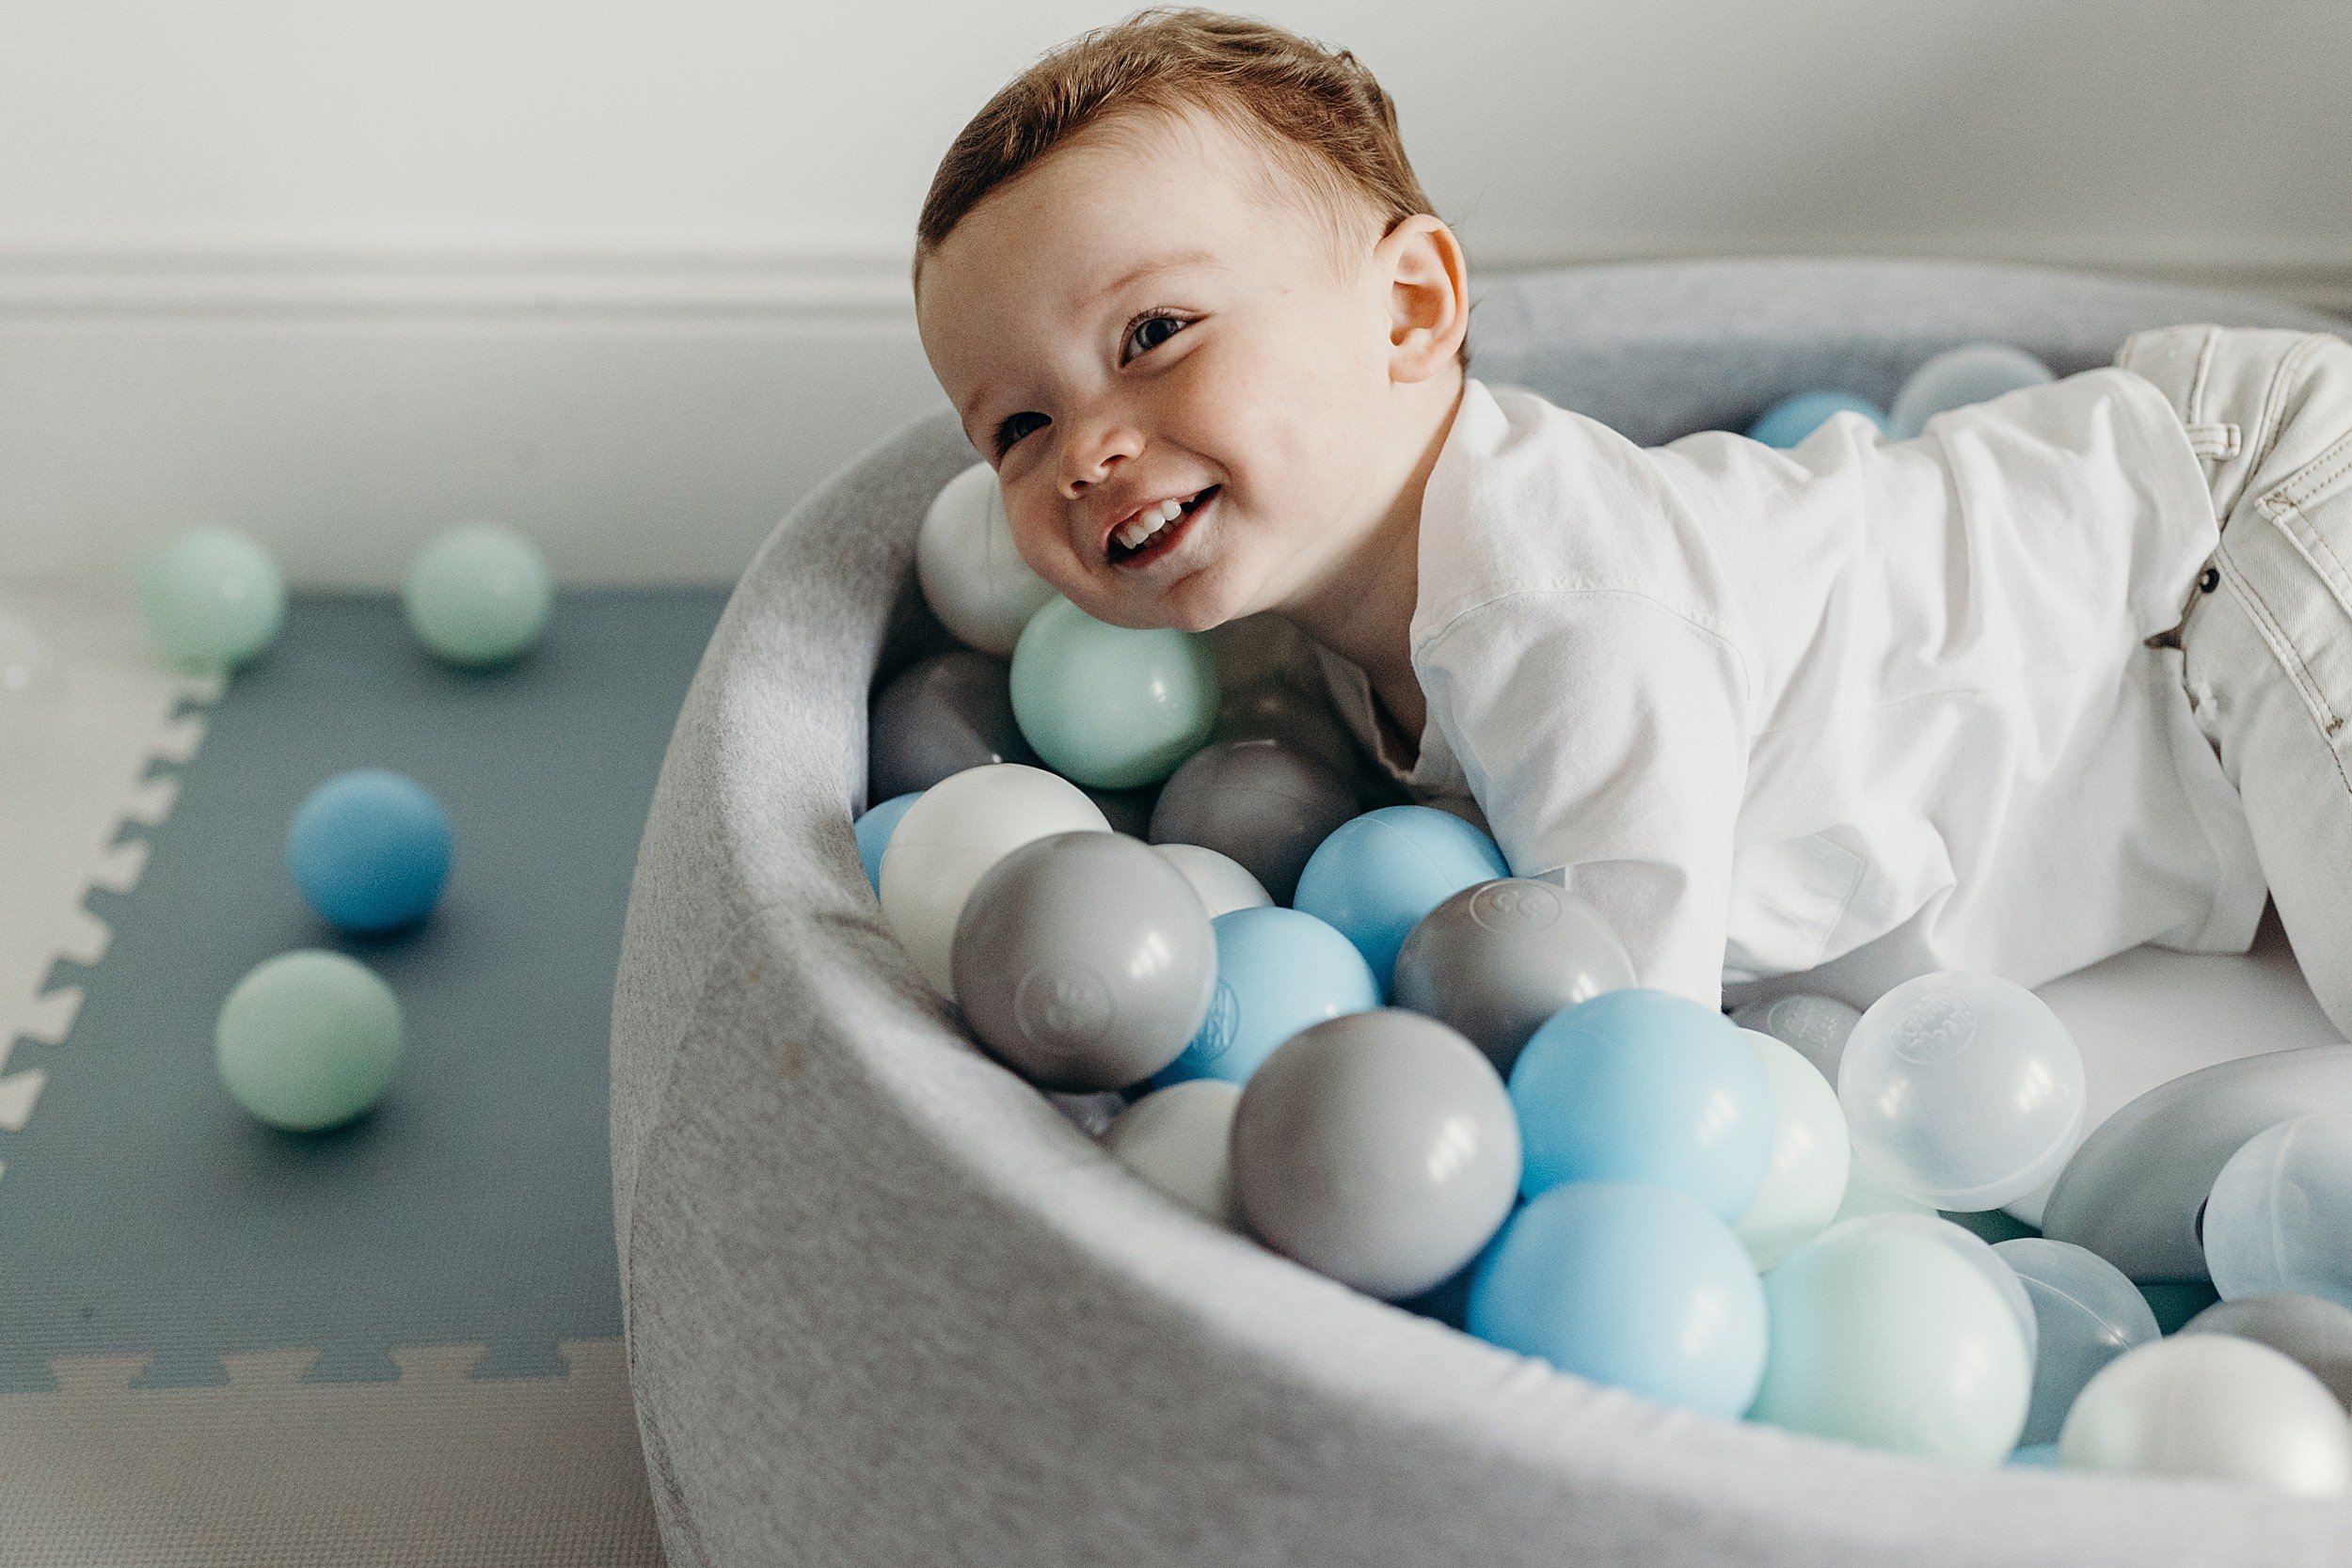 family photographer glasgow captures toddler boy with red hair playing in a ball pool 